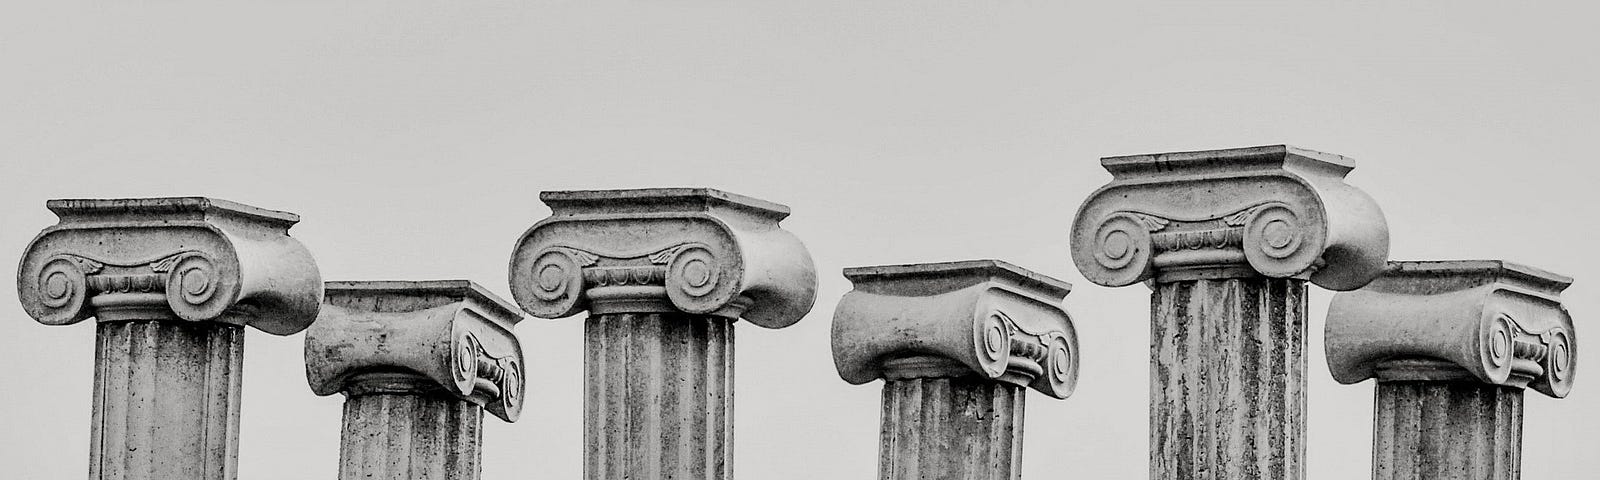 The top halves of 6 ancient pillars in greyscale.